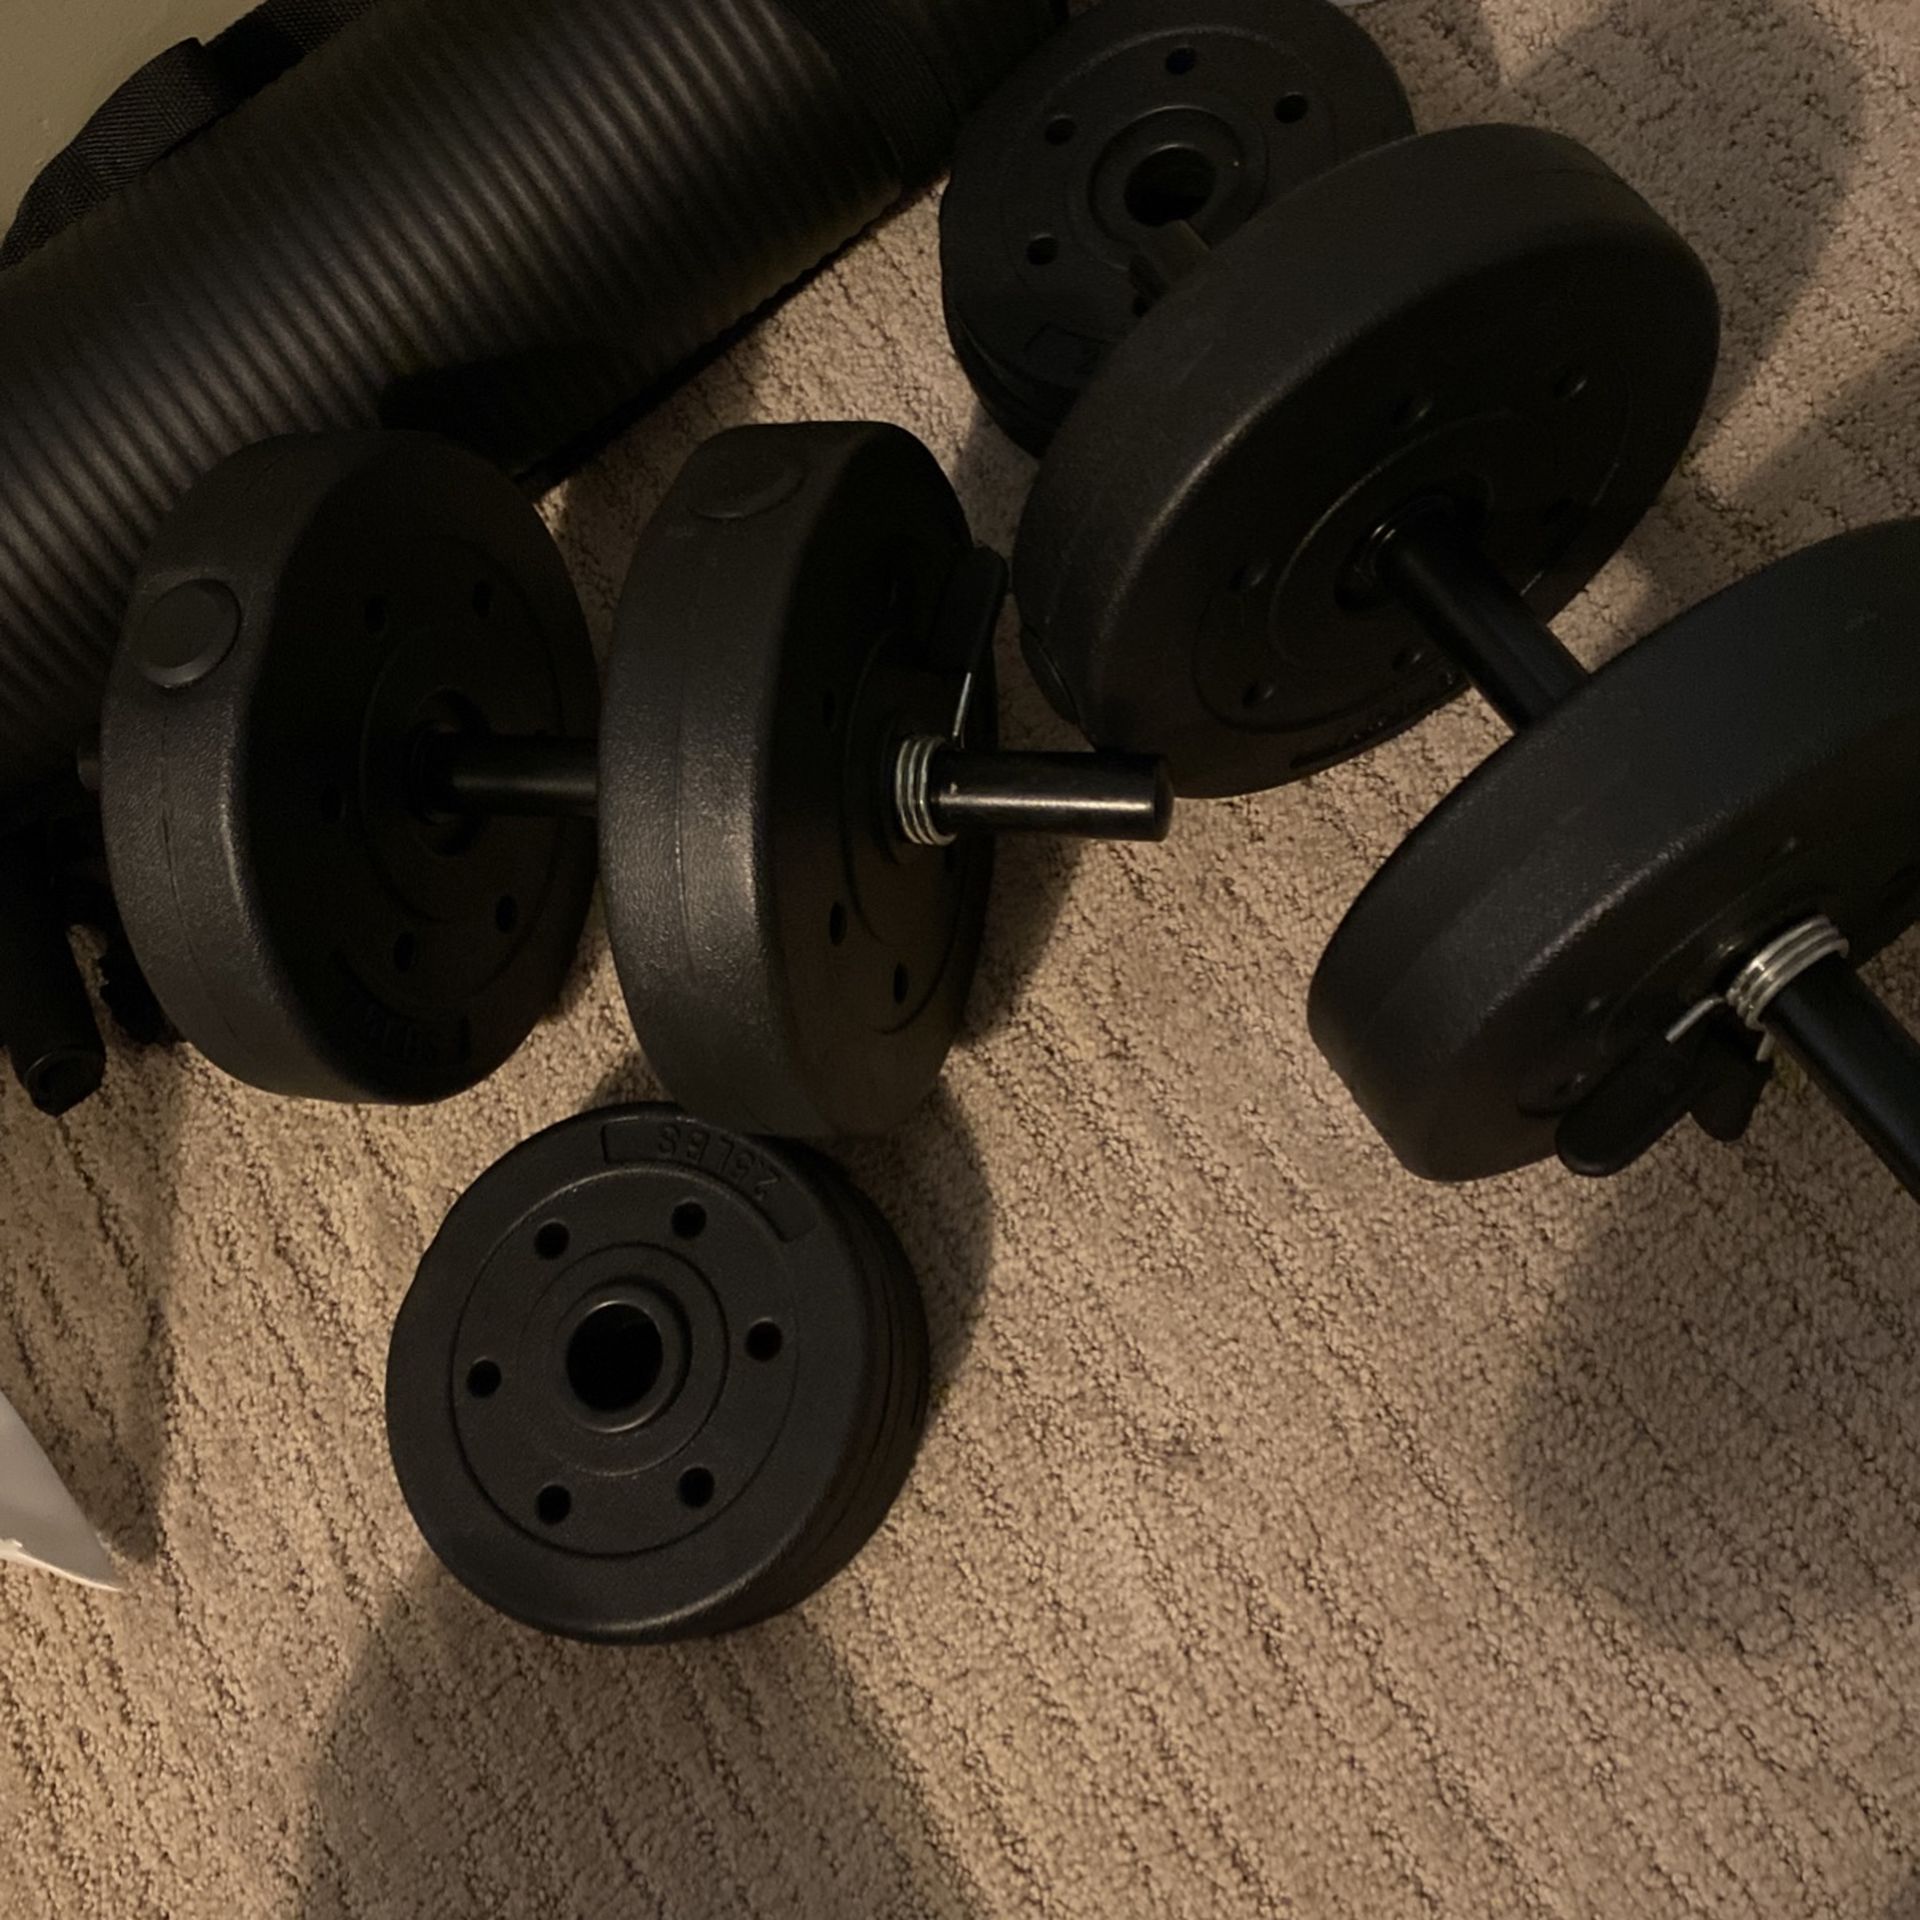 At Home Weight Lifting Equipment